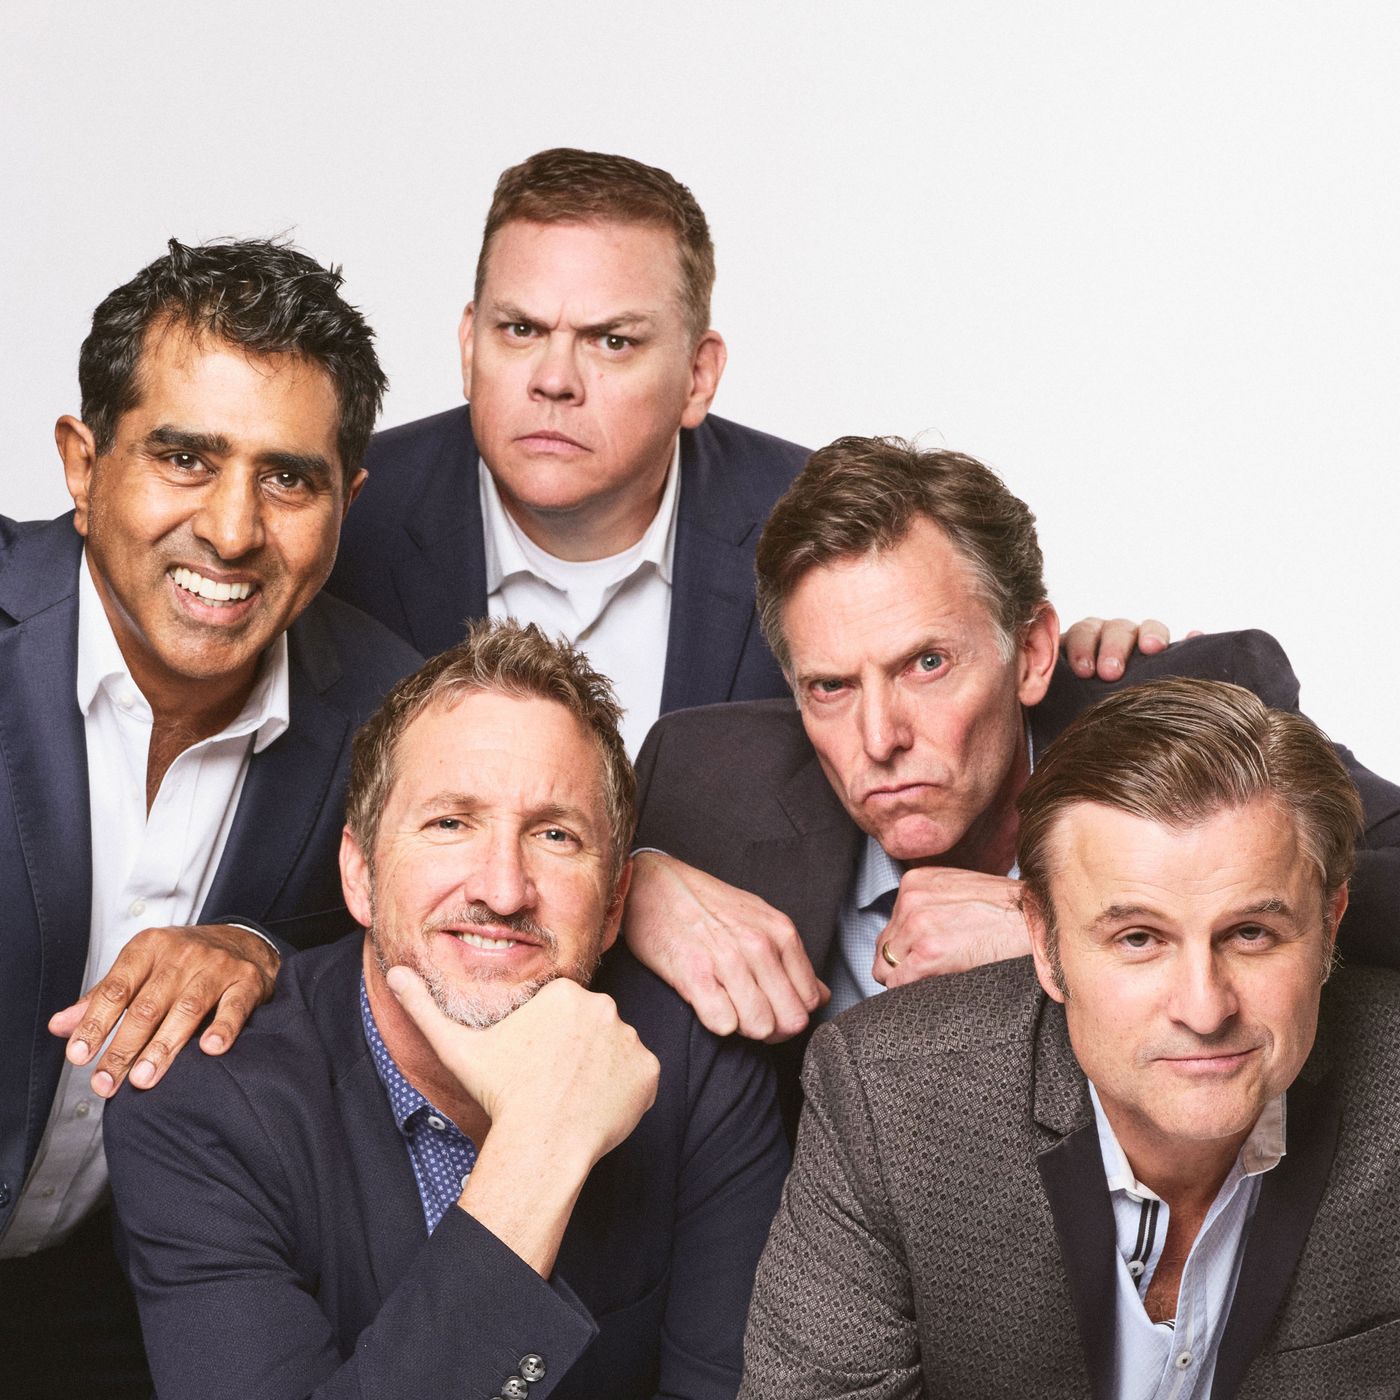 Super Troopers Cast Reunites to Talk About The Cult Classic